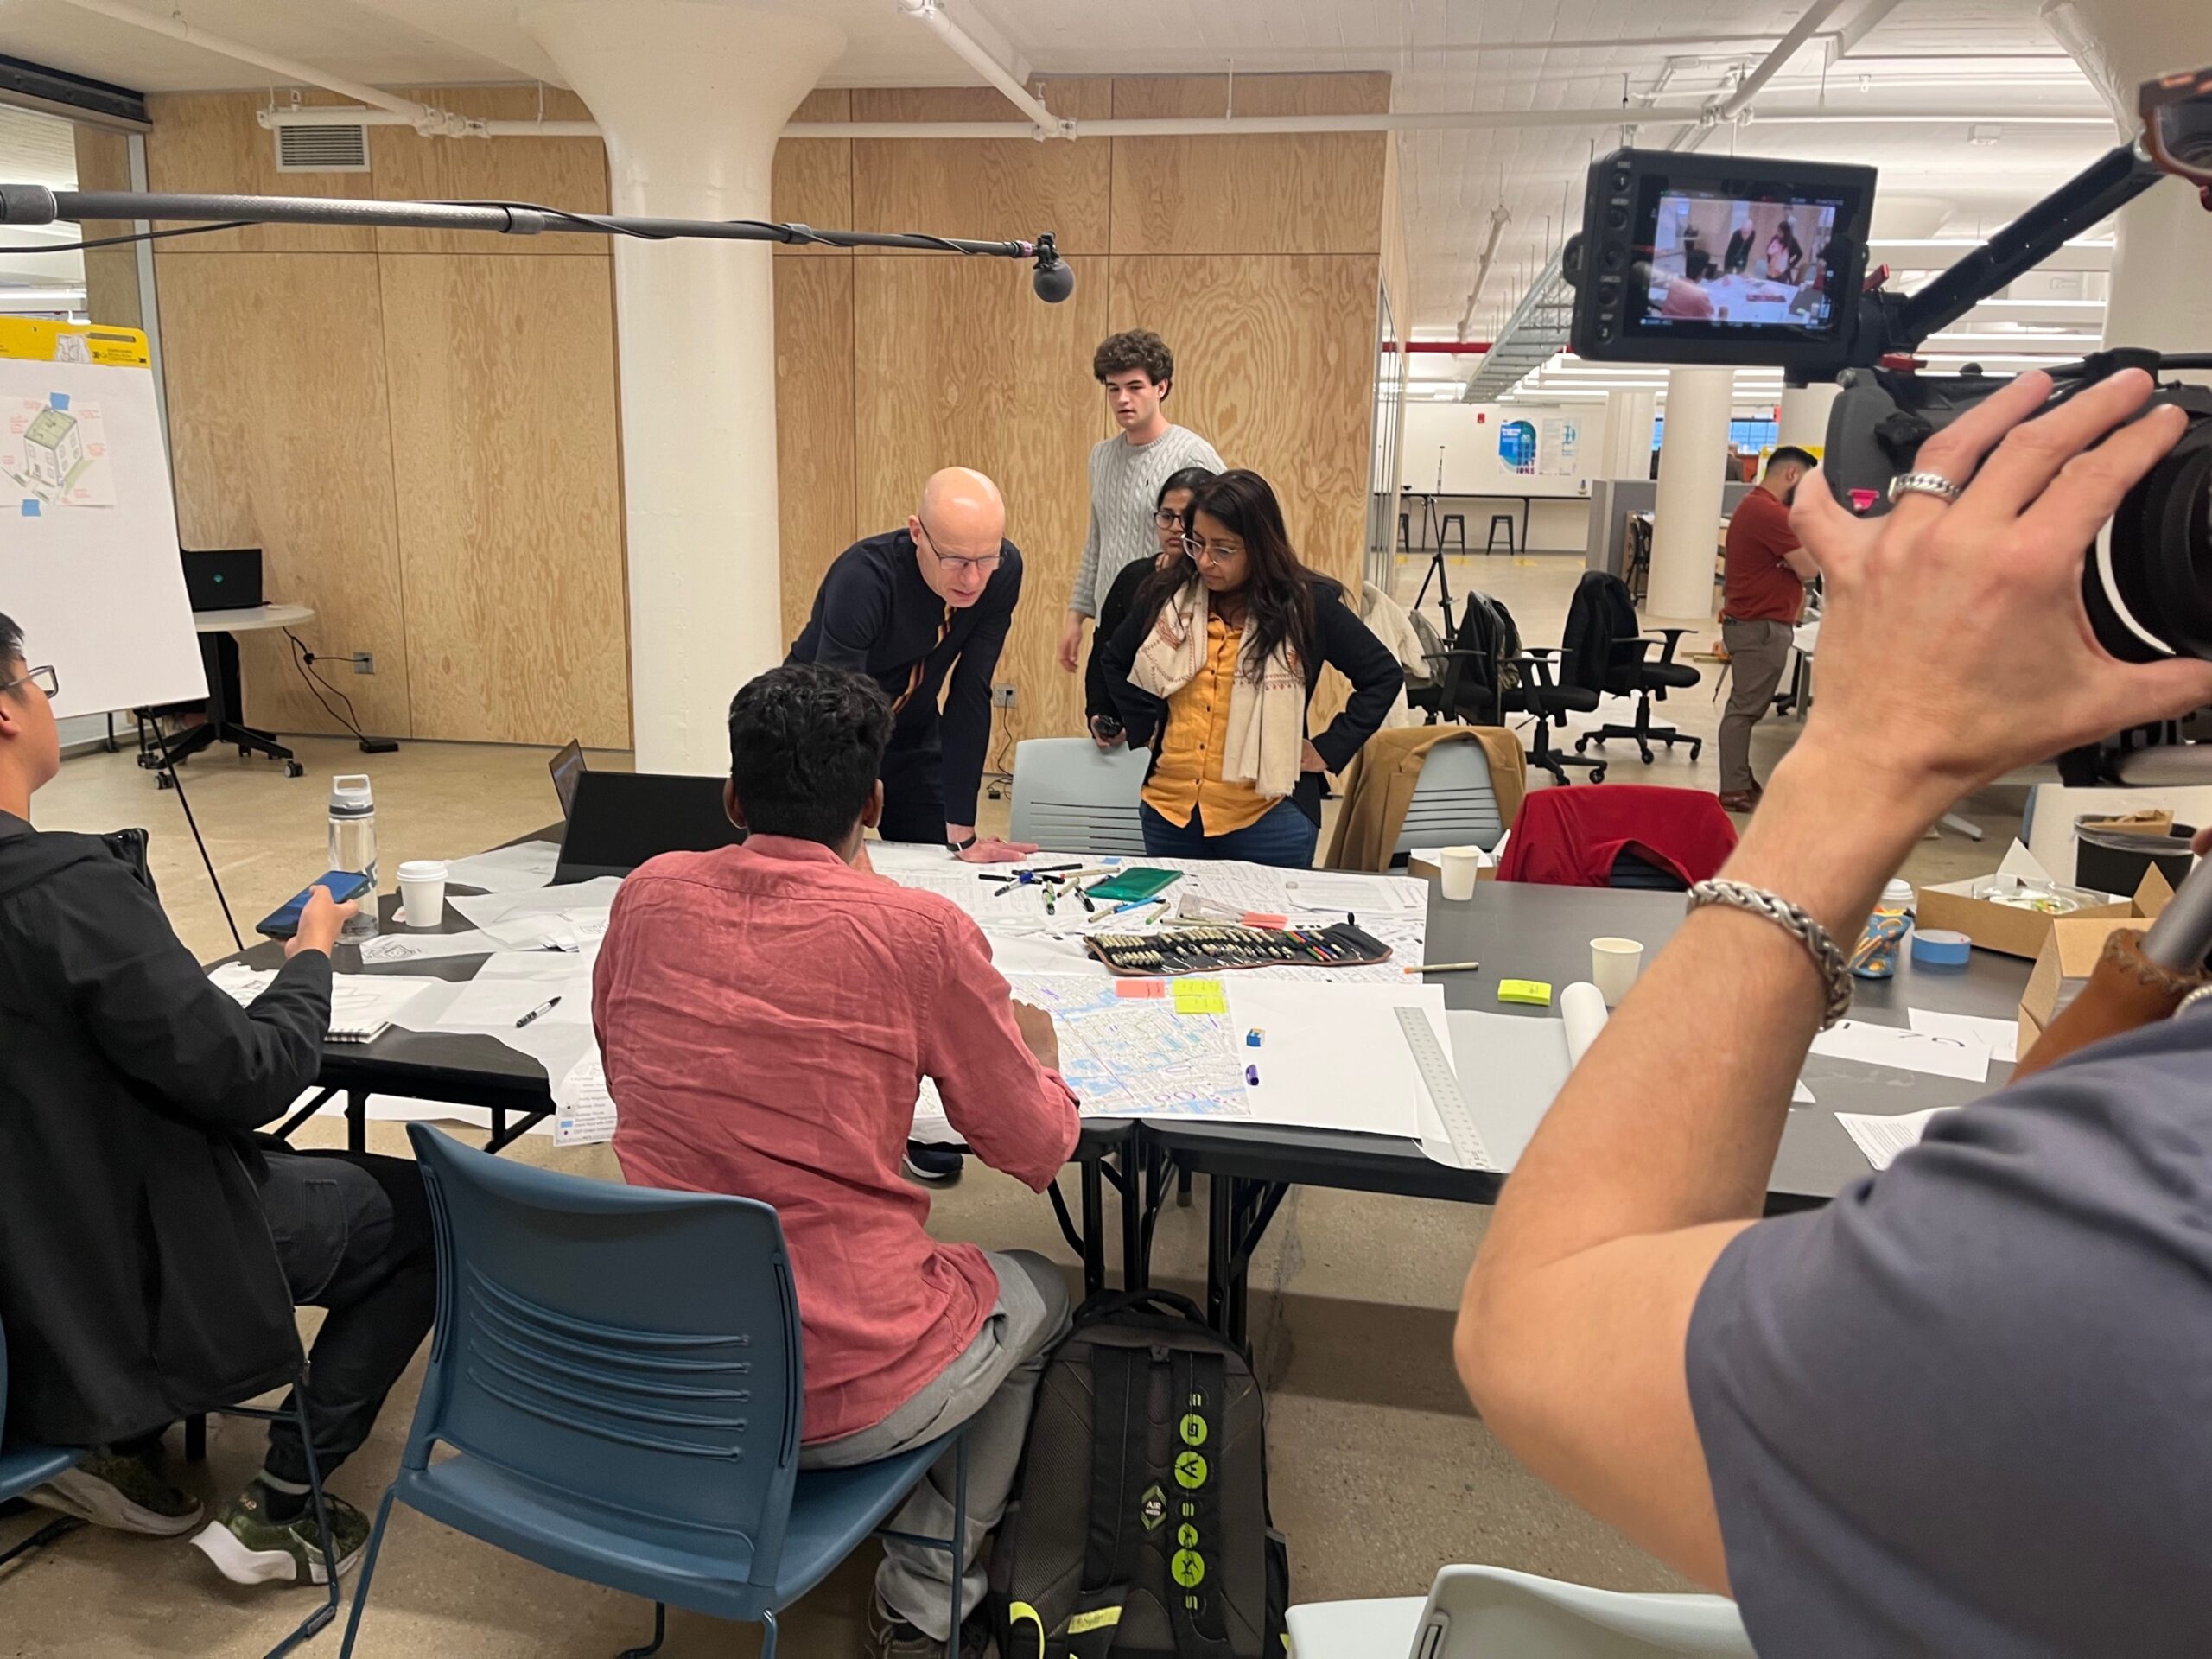 Henk Ovink working with Priyamwada Singh and students on an urban absorbency strategy for the Hollis neighborhood in Queens, NYC during a design workshop.